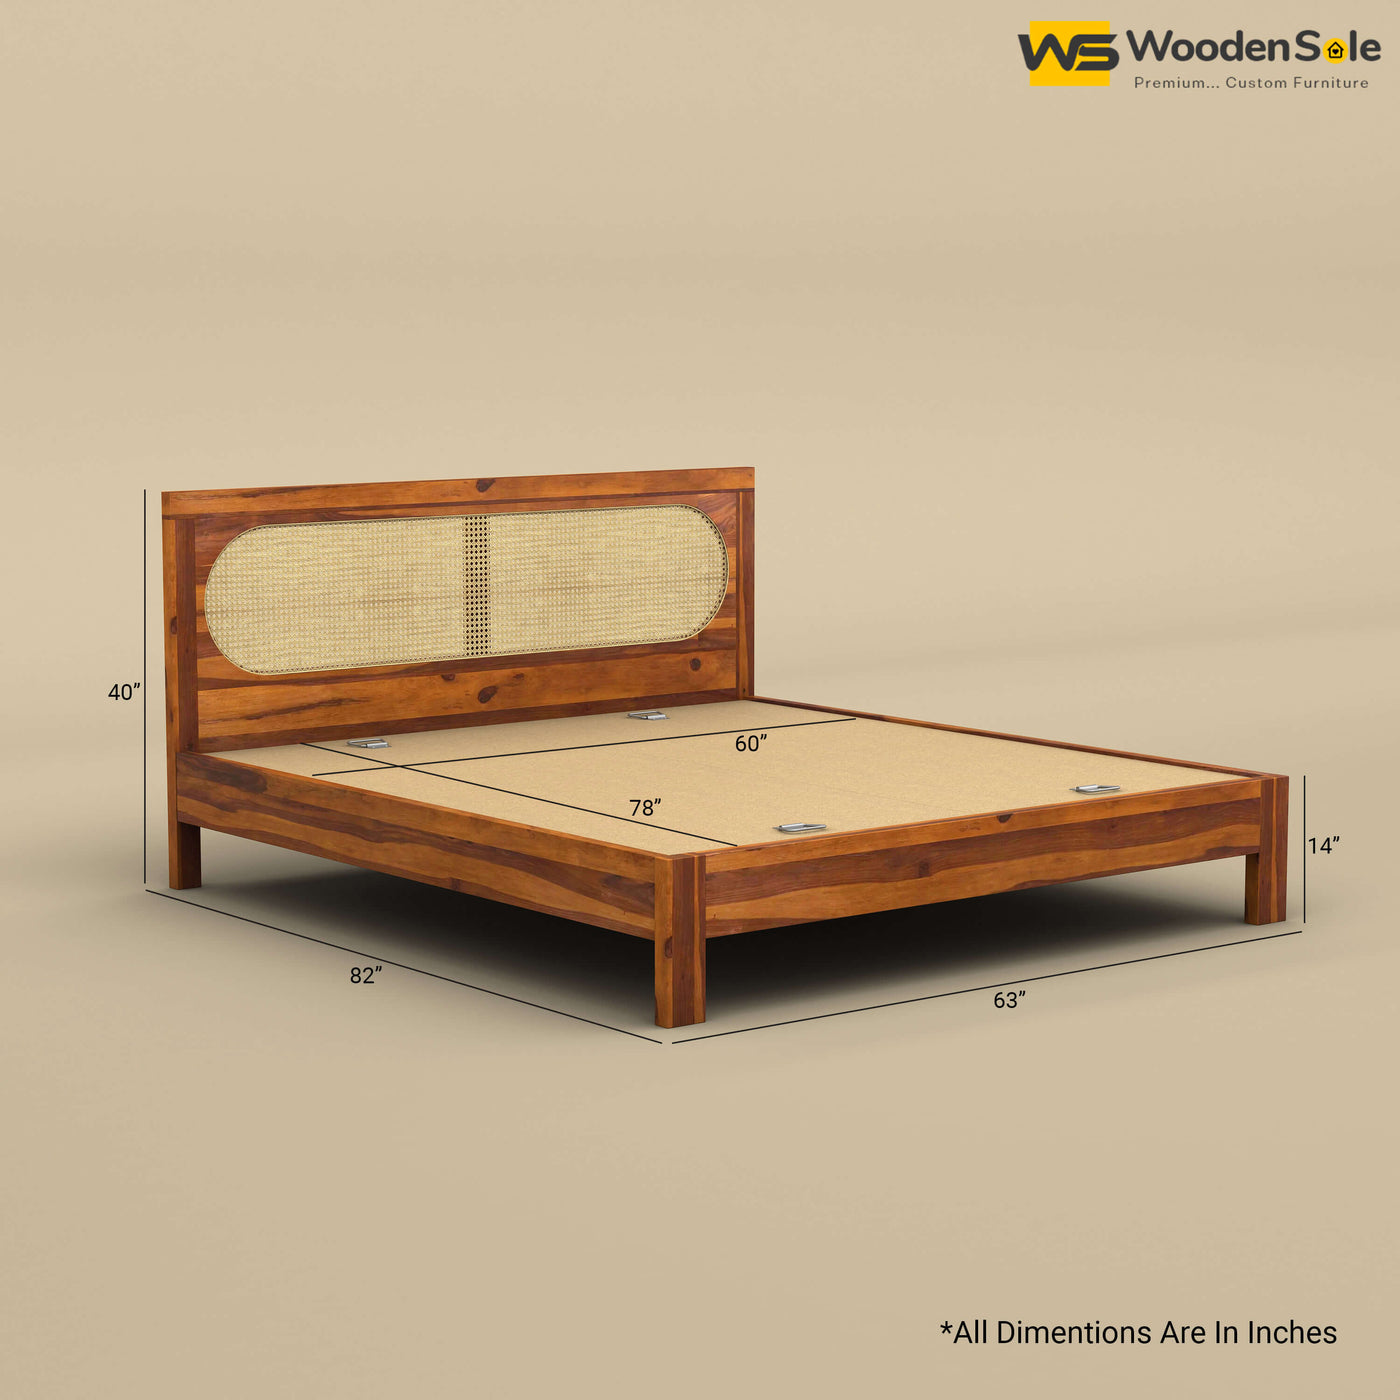 Wooden Sole Caning Bed (Queen Size, Honey Finish)